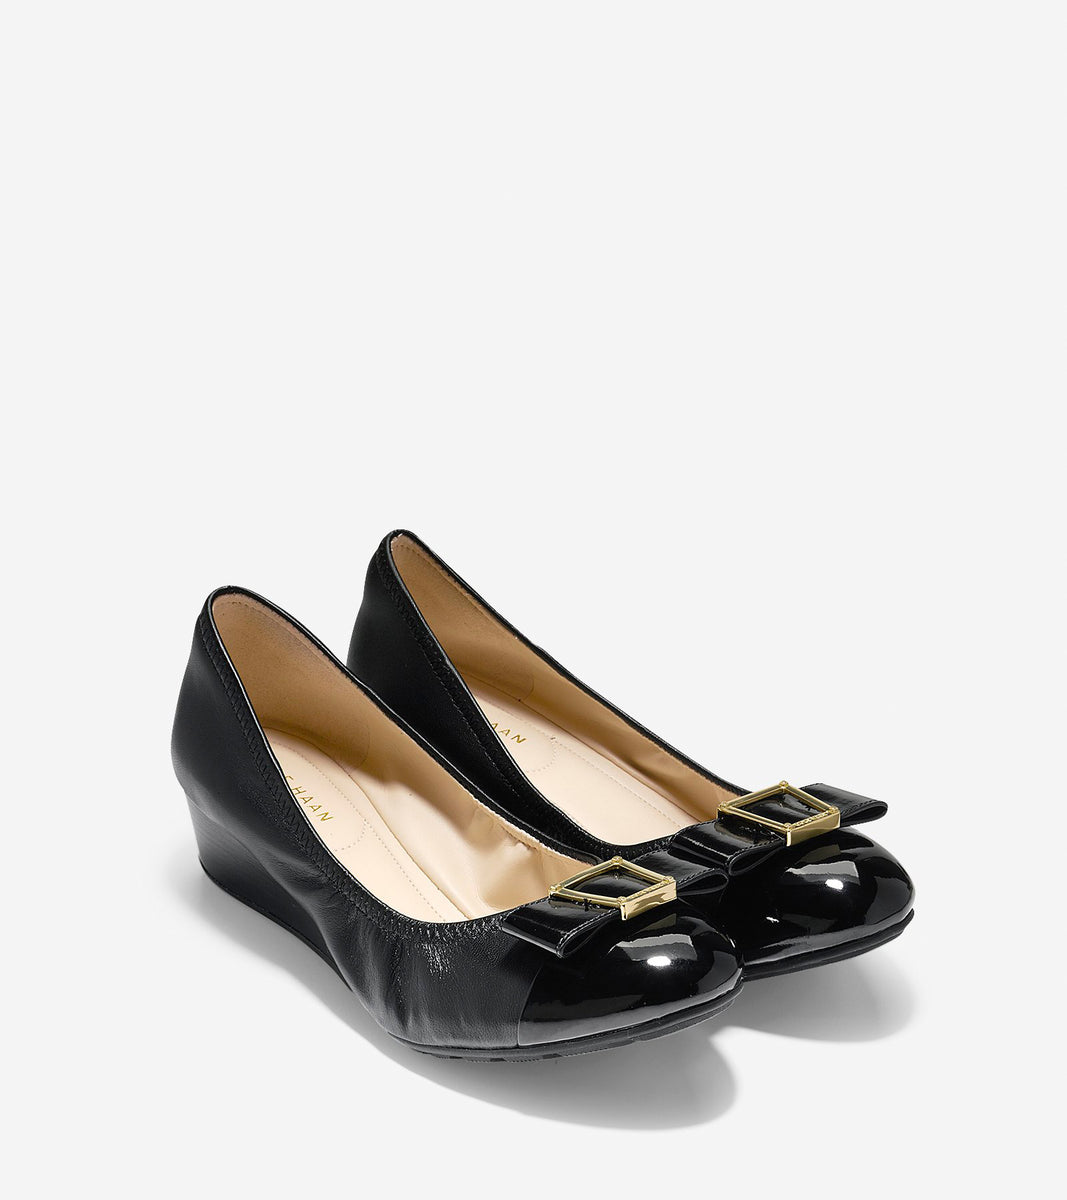 ColeHaan-Emory Bow Wedge-w09950-Black